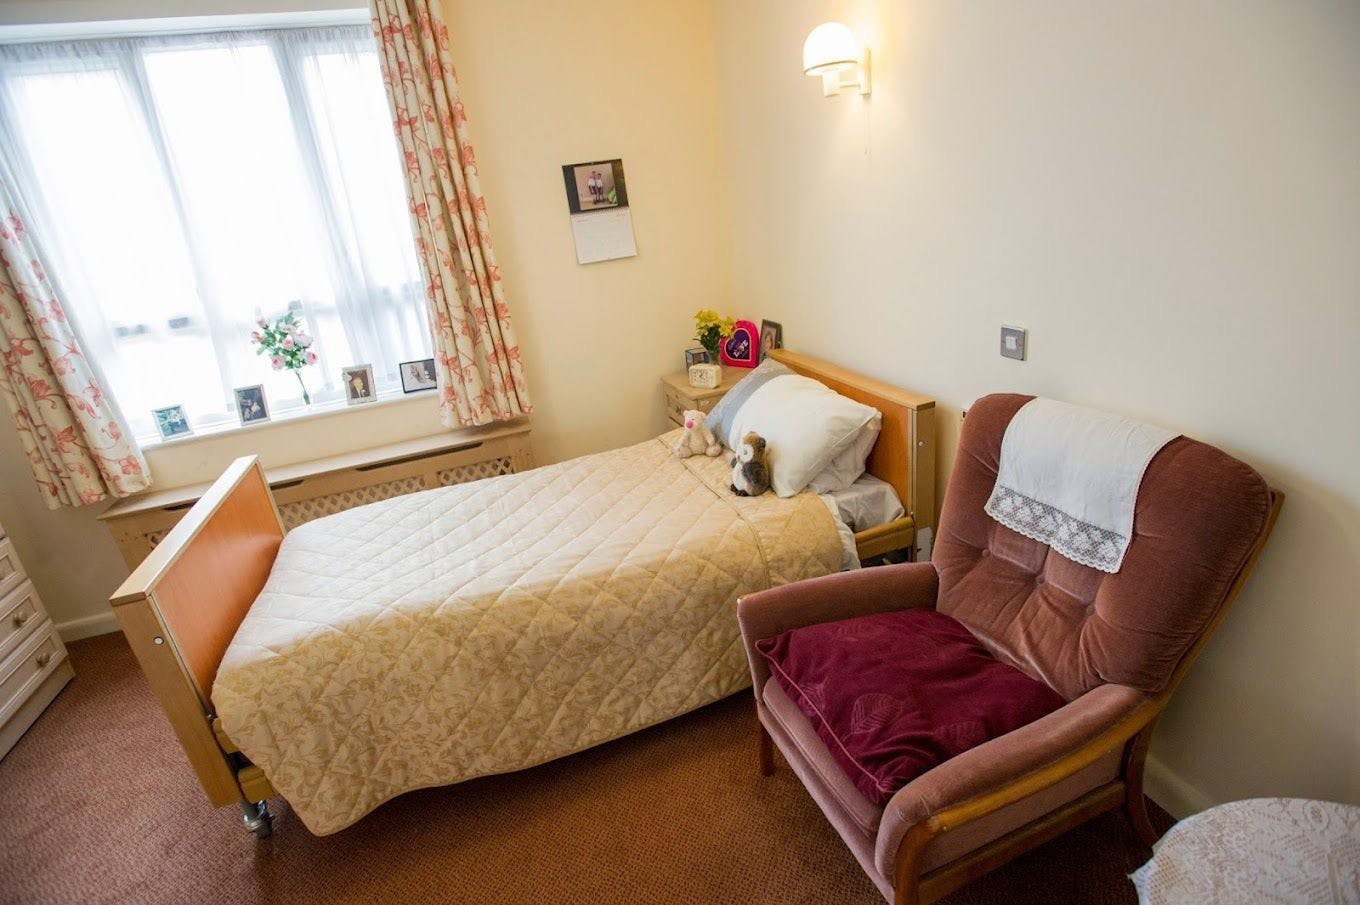 Bedroom at Chadwell House Care Home in Romford, Havering